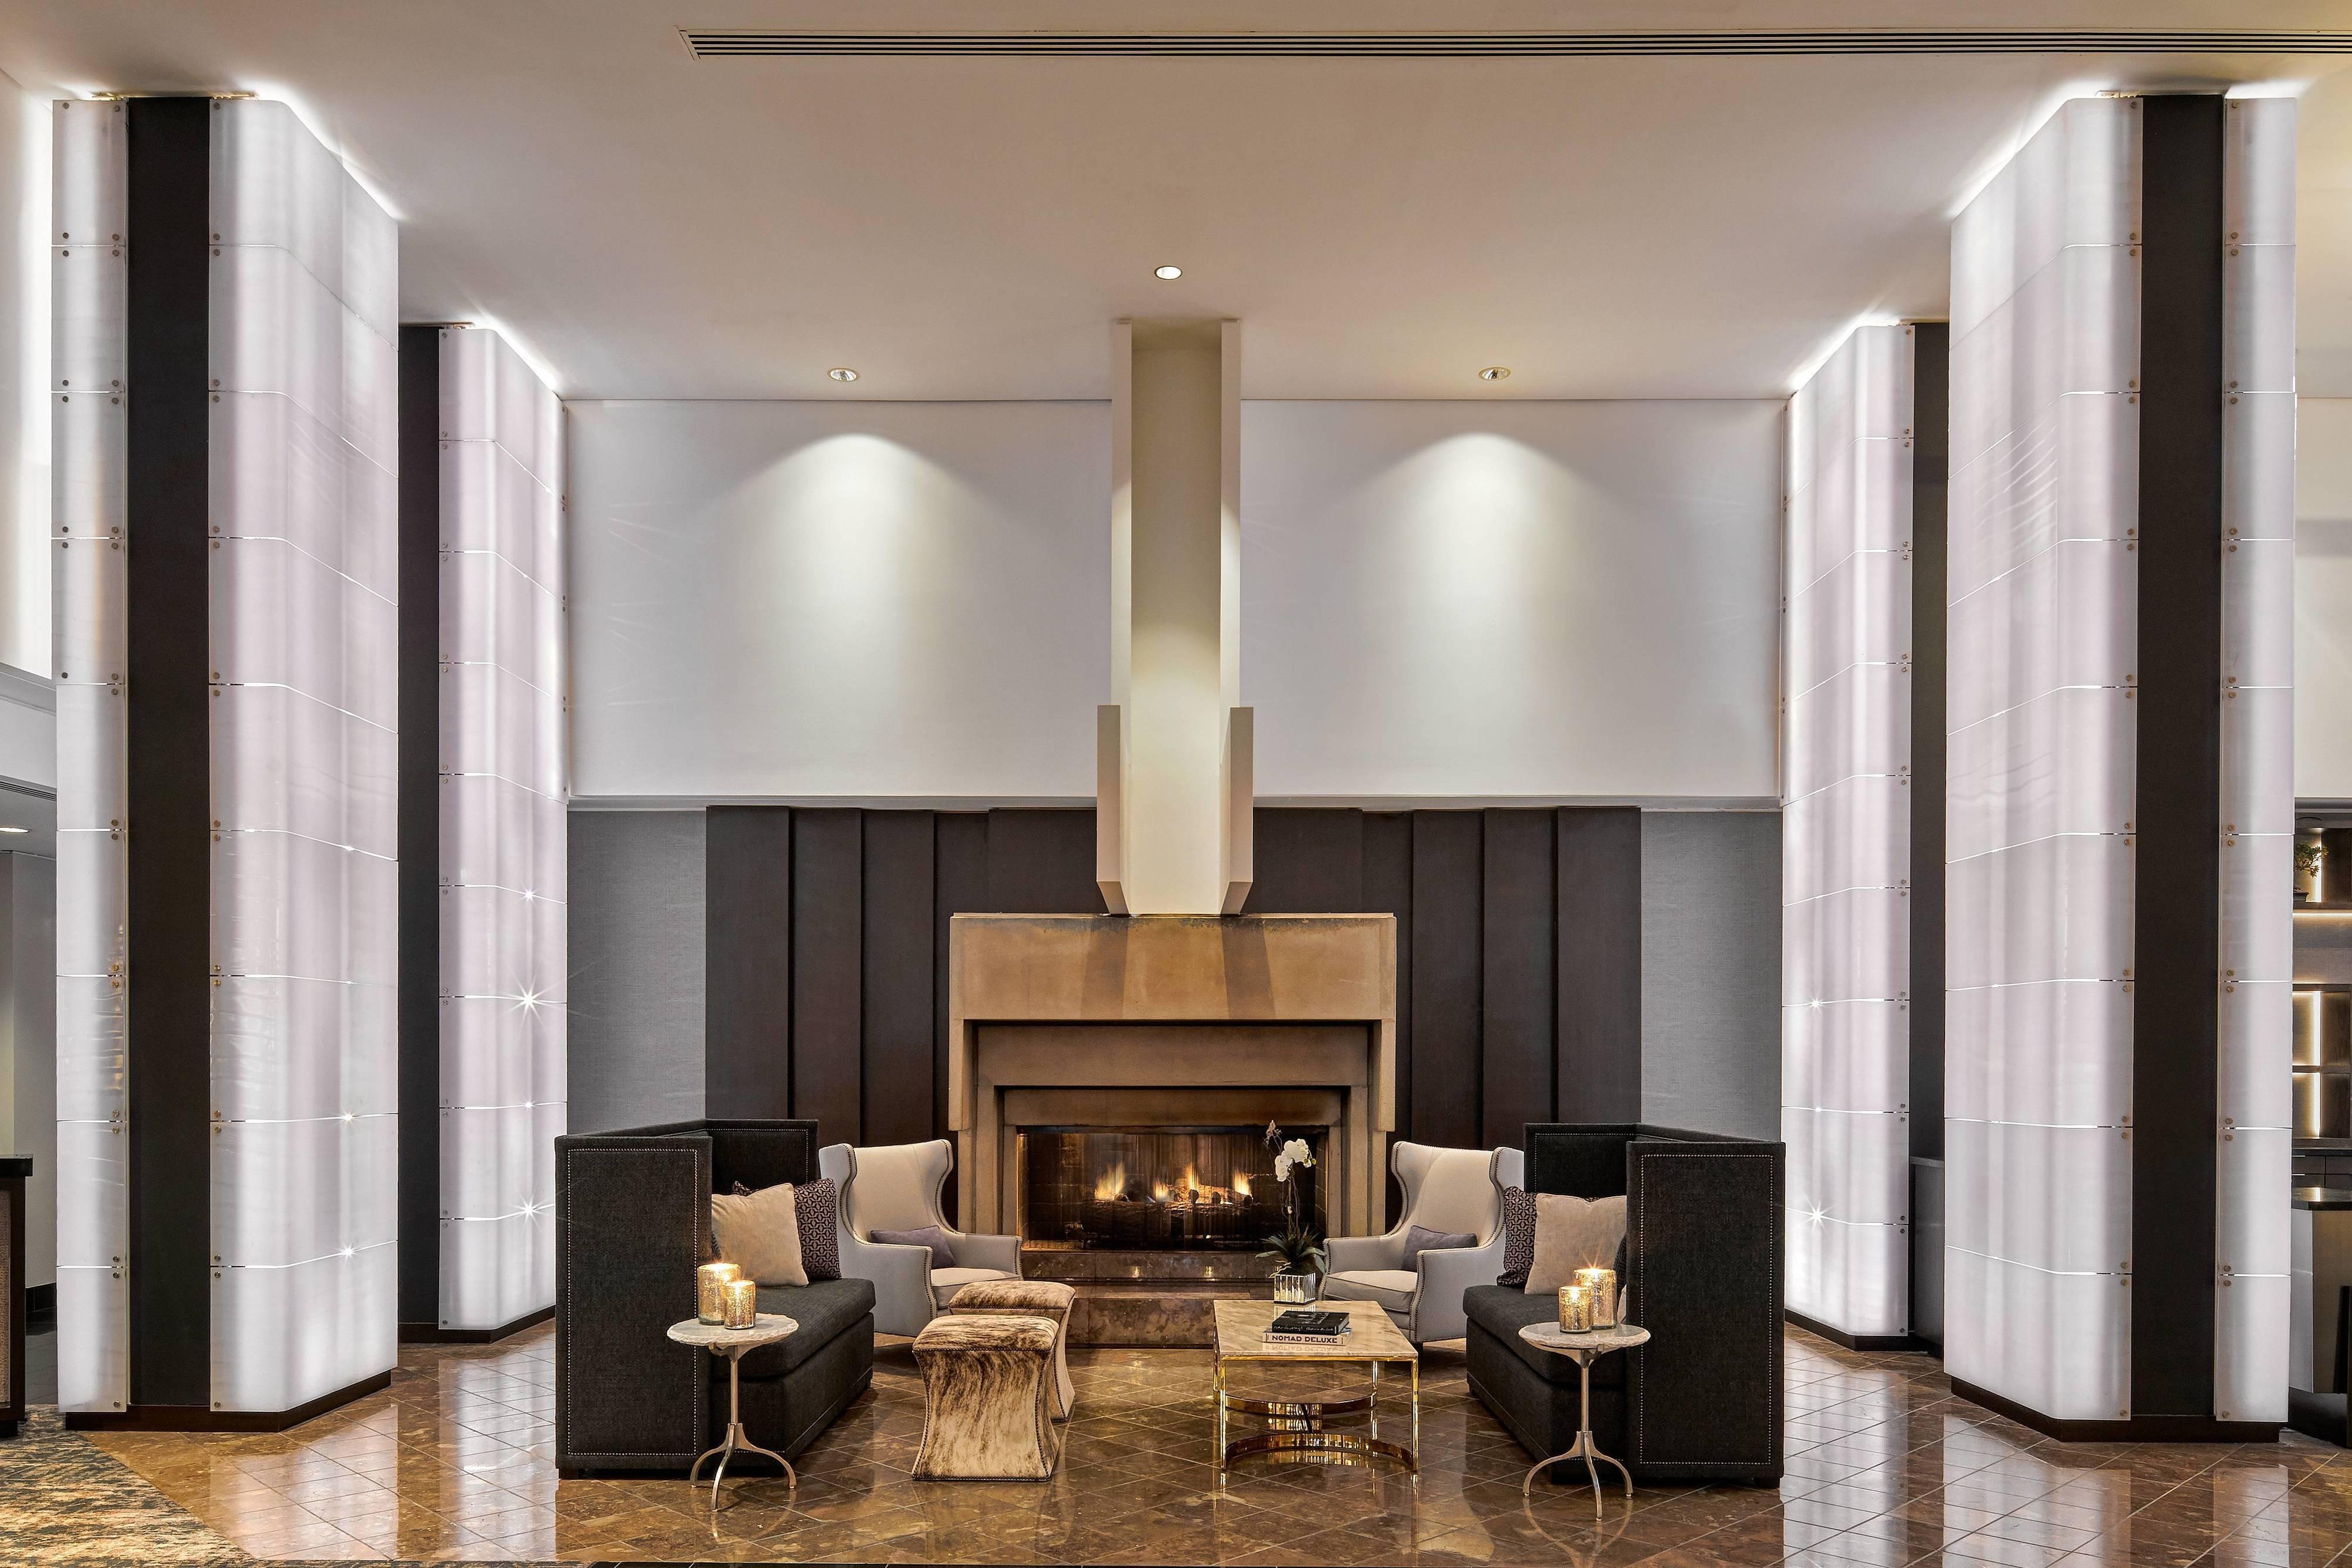 stylish lobby seating by a fireplace